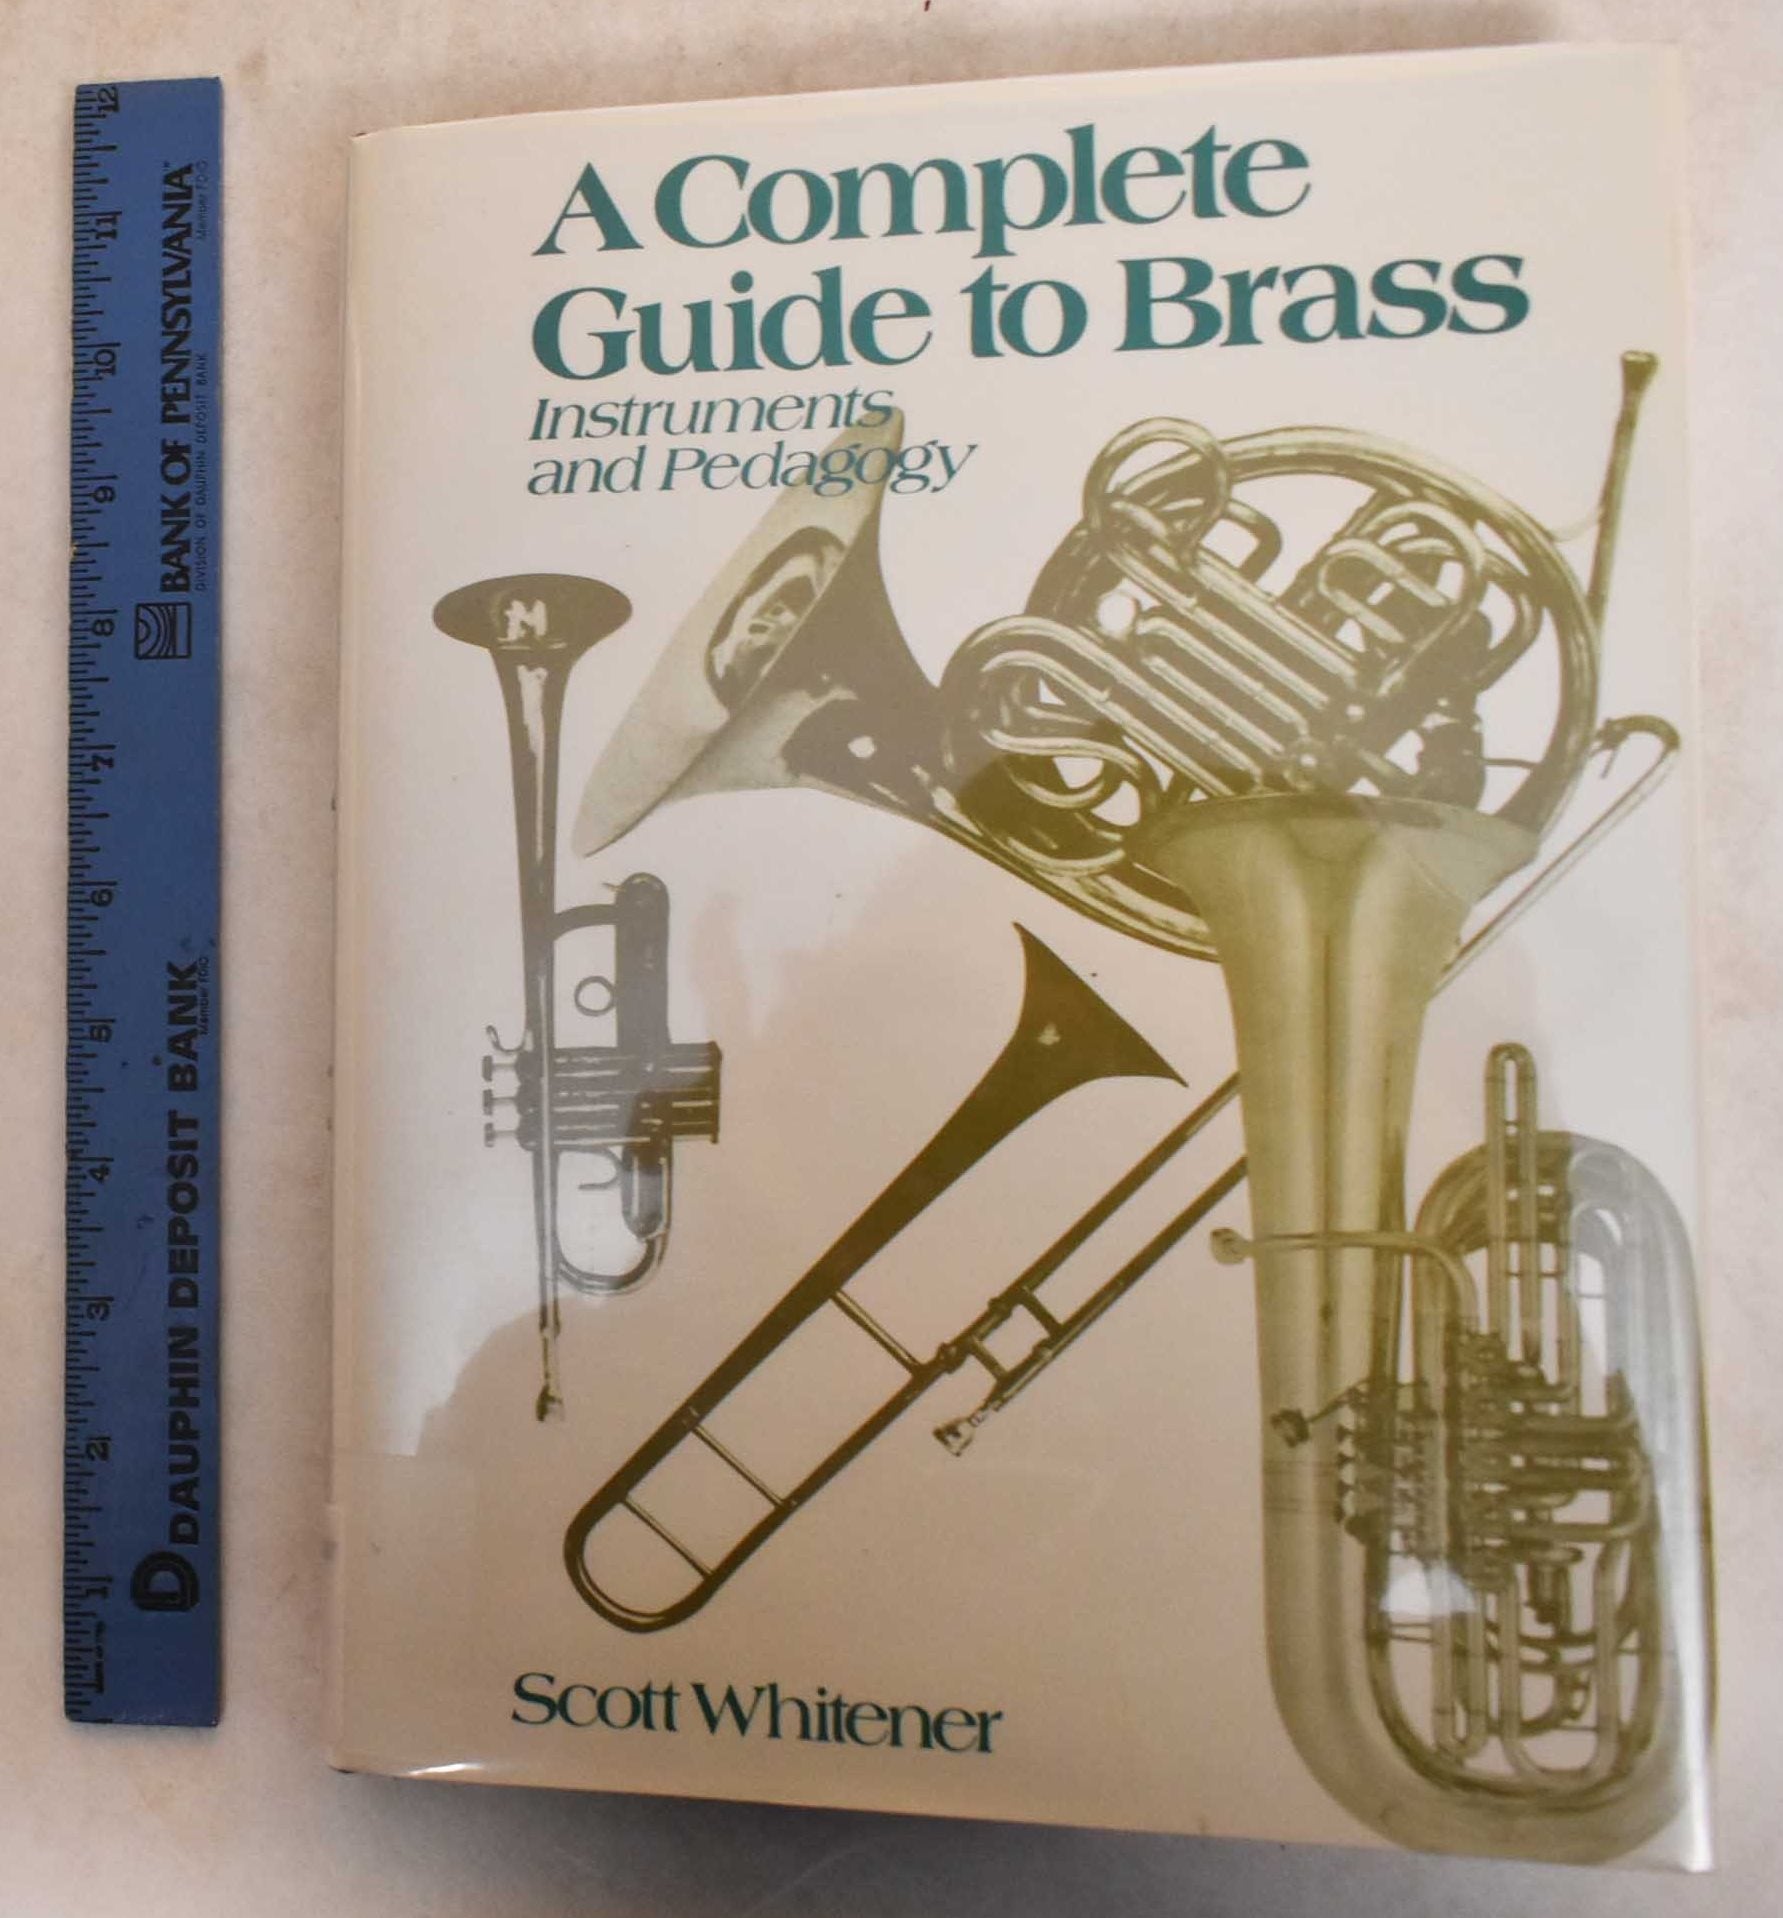 An introduction to: Brass Bands